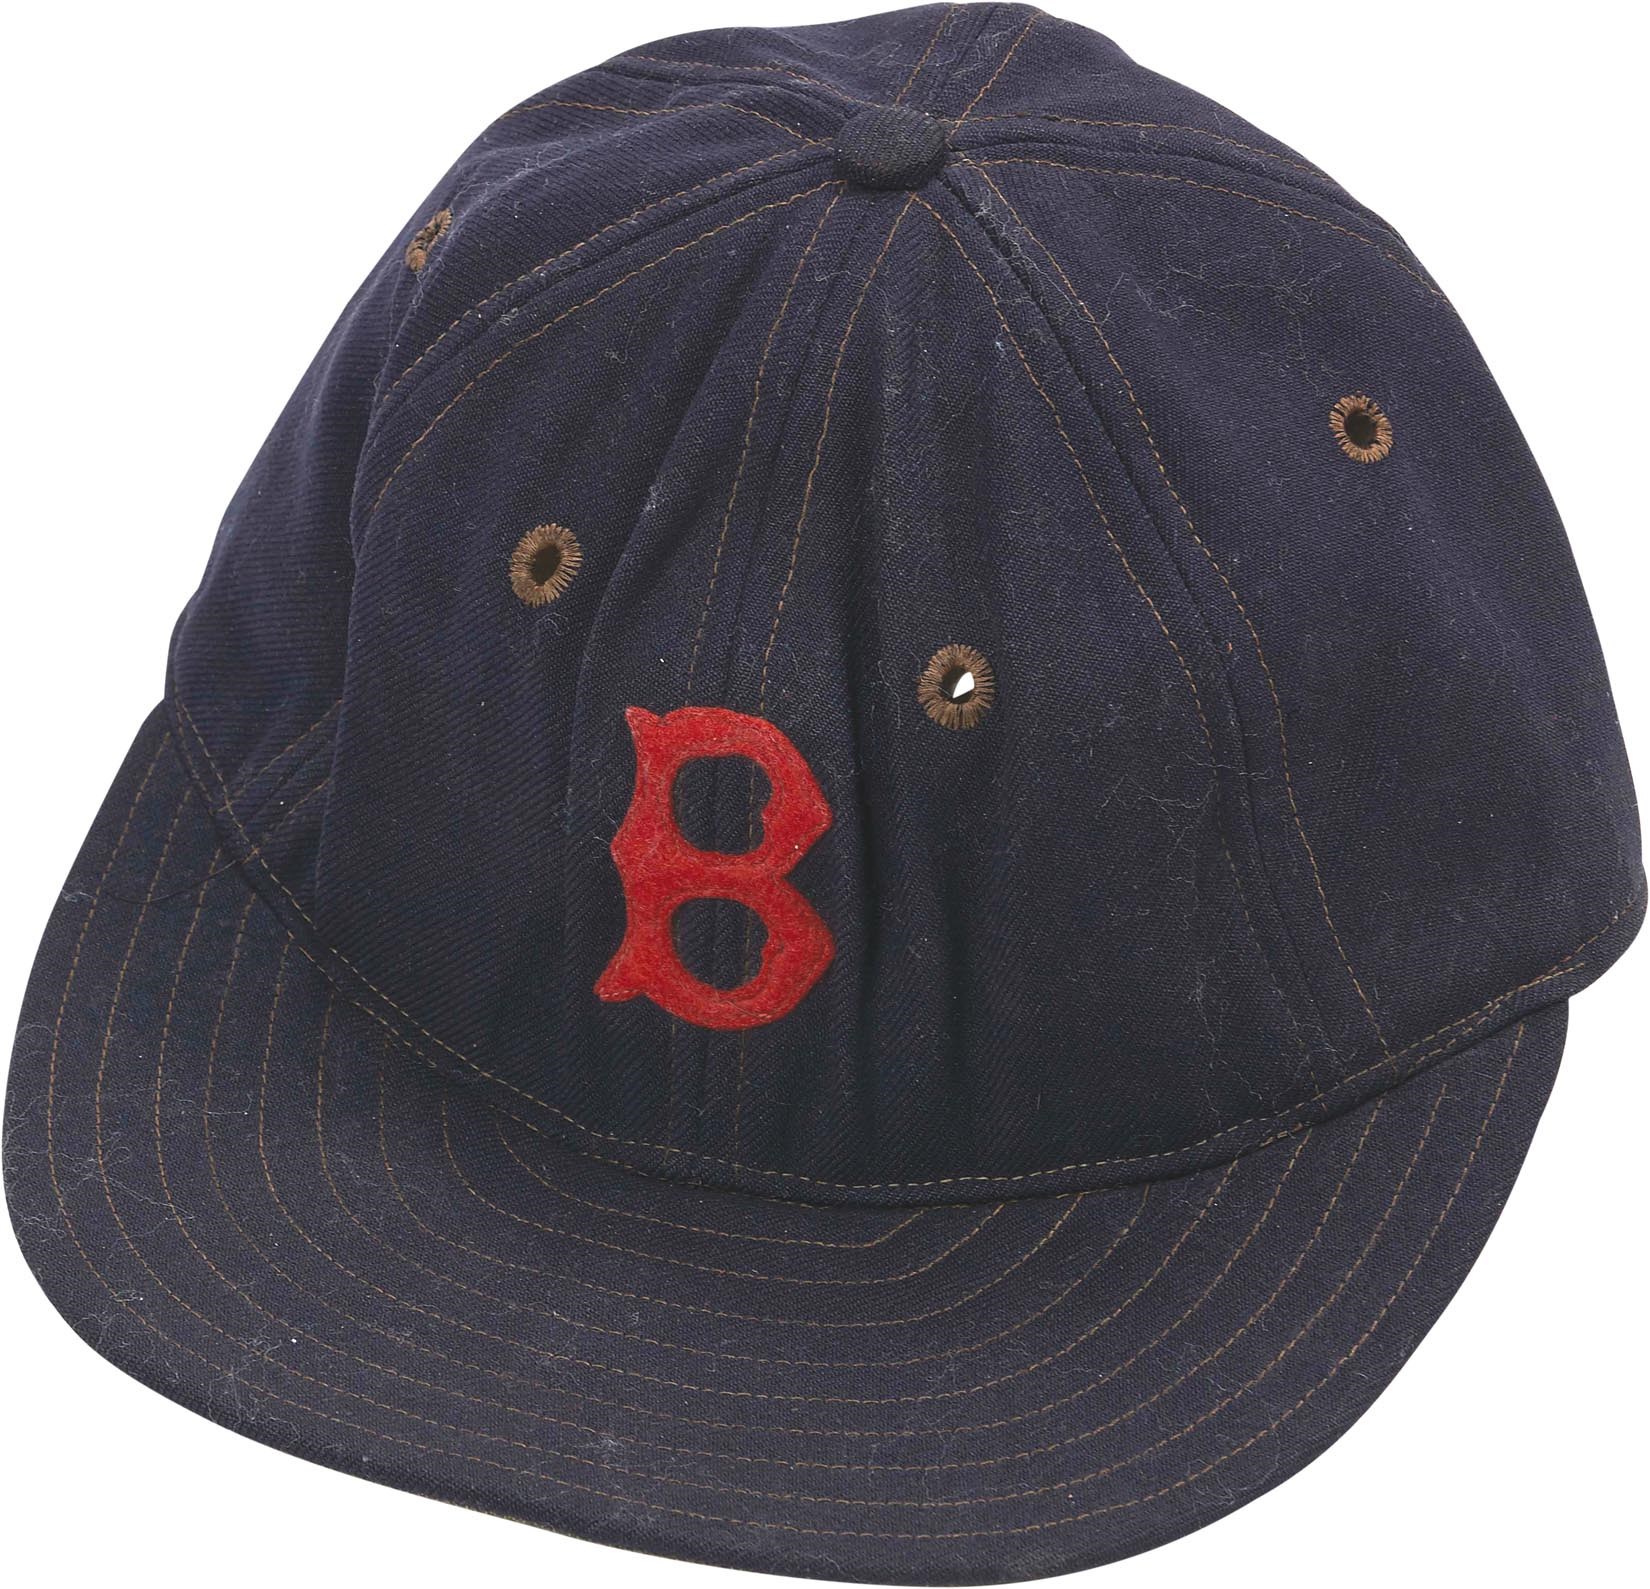 Boston Sports - Important 1941 Ted Williams Game Worn Red Sox Cap